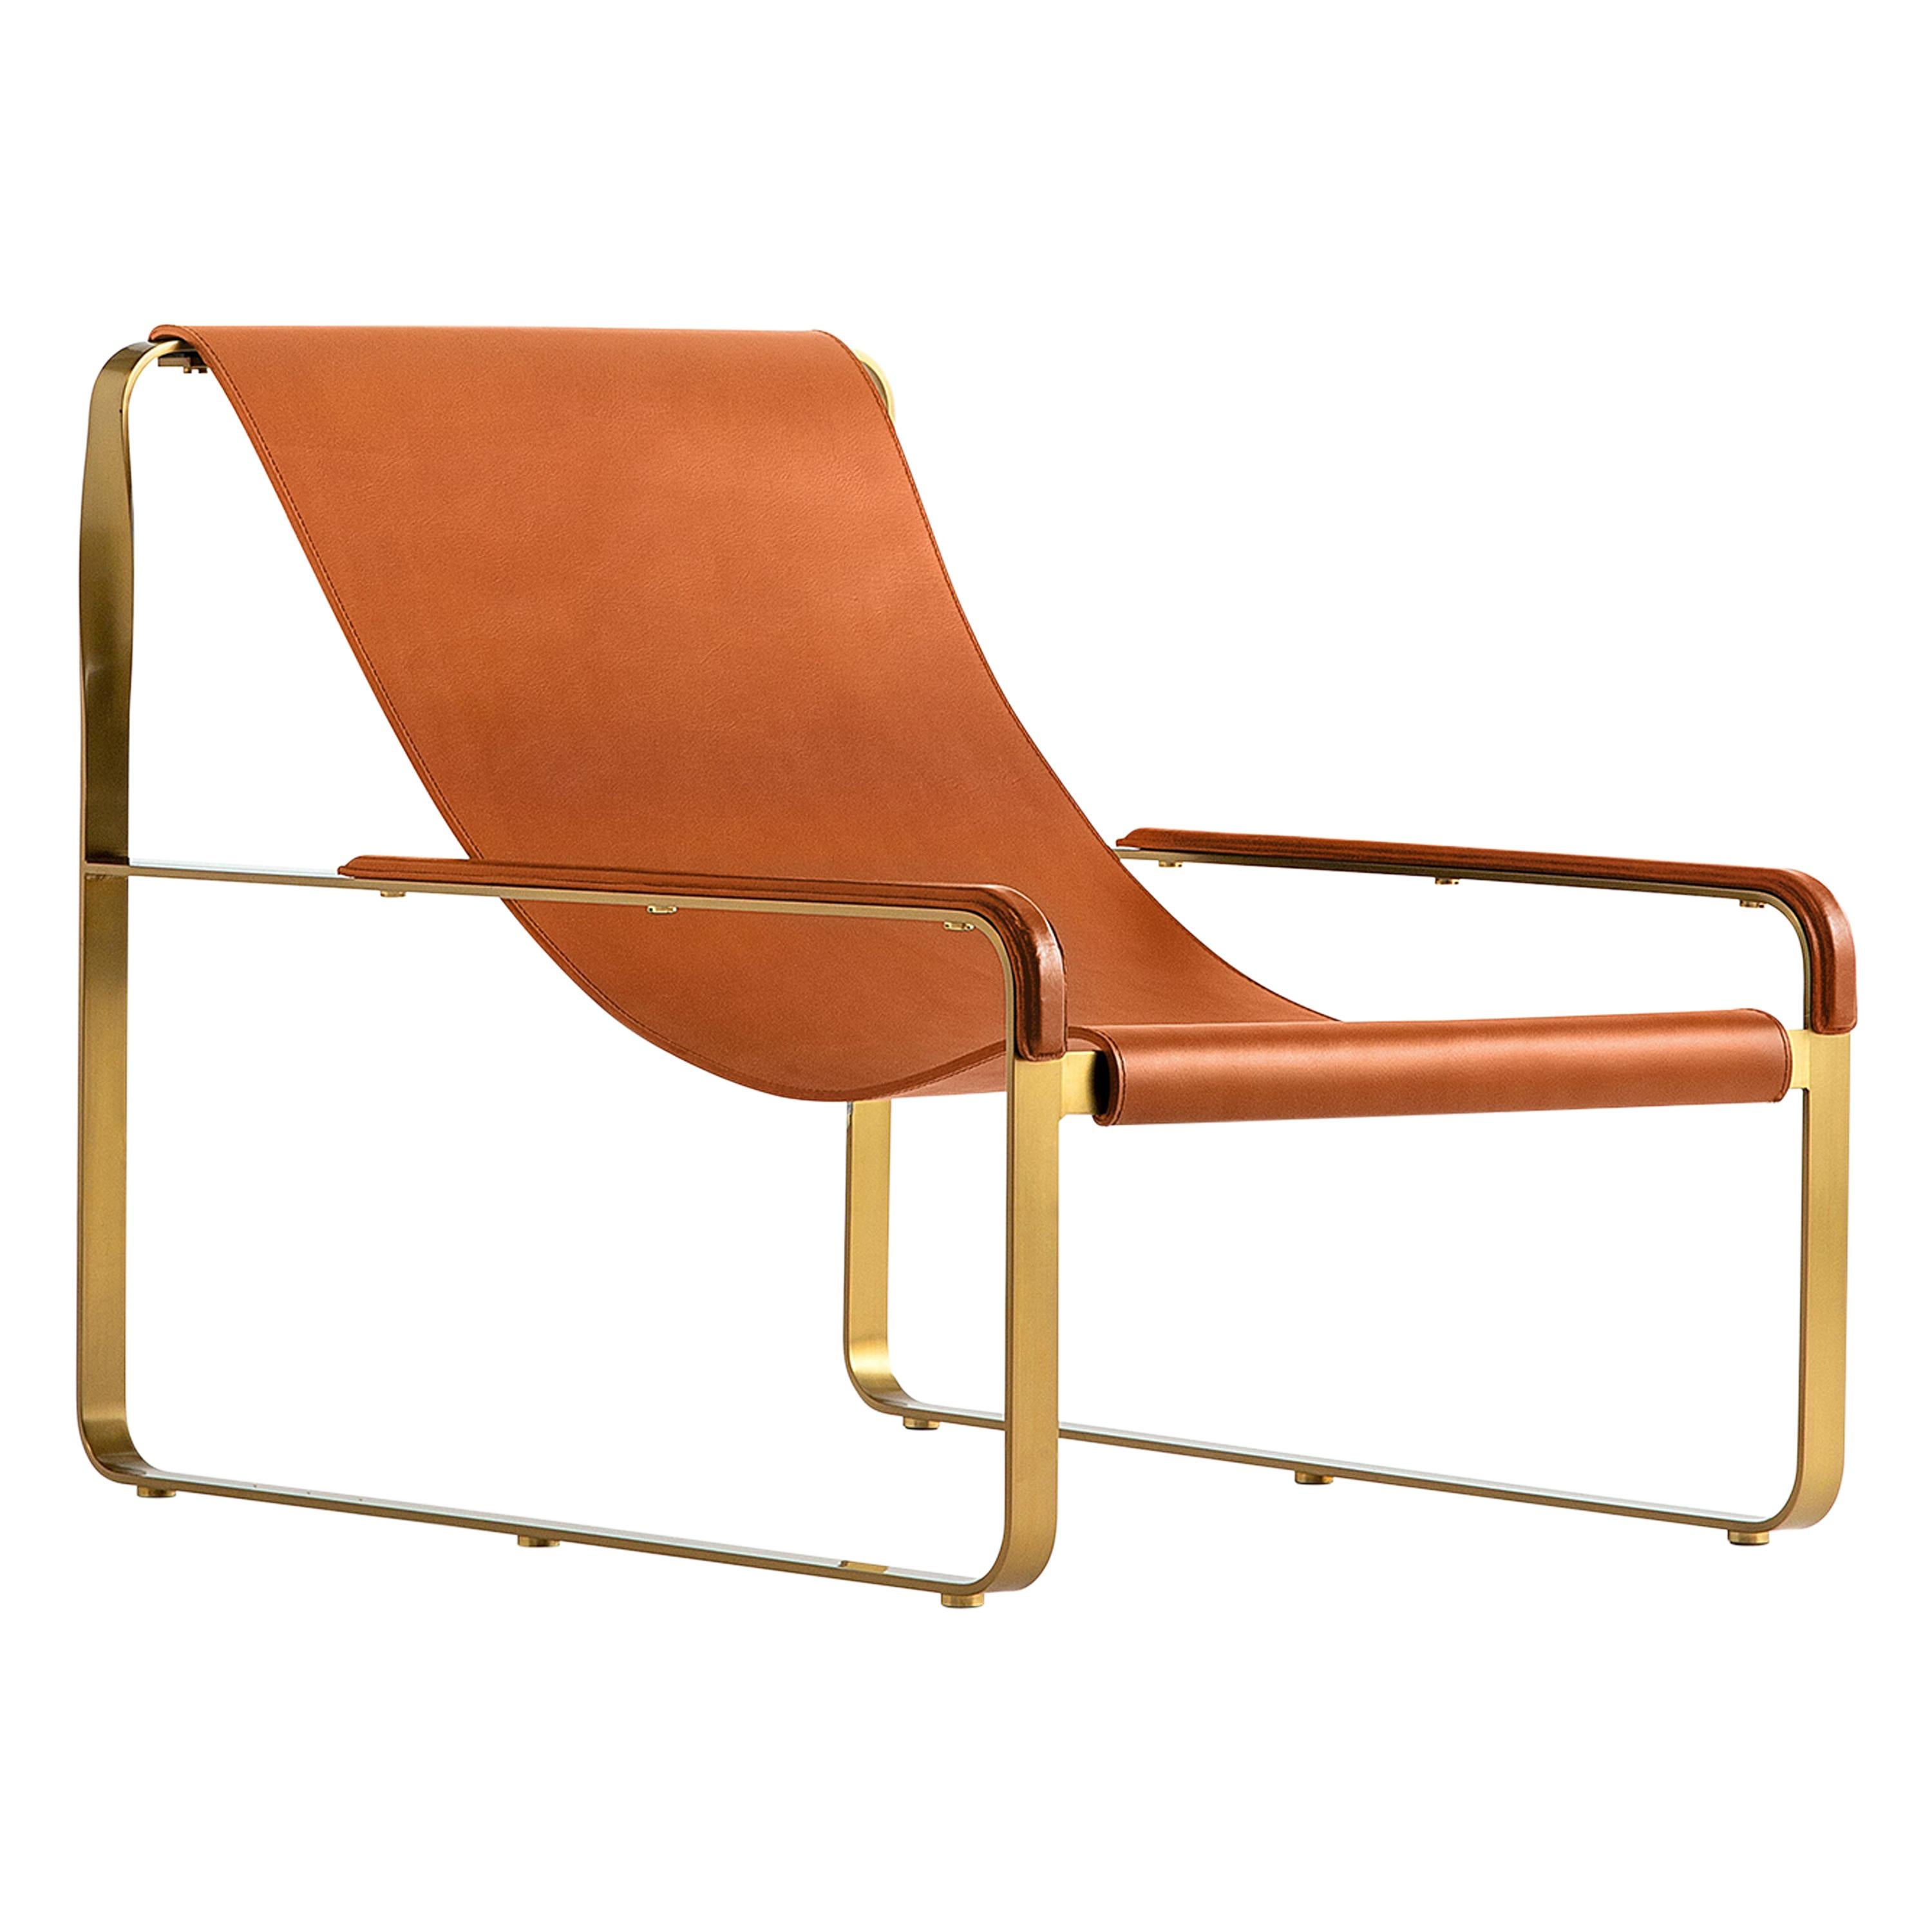 Chaise longue Contemporary Timeless Steel Aged Brass Steel & Natural Tobacco Leather